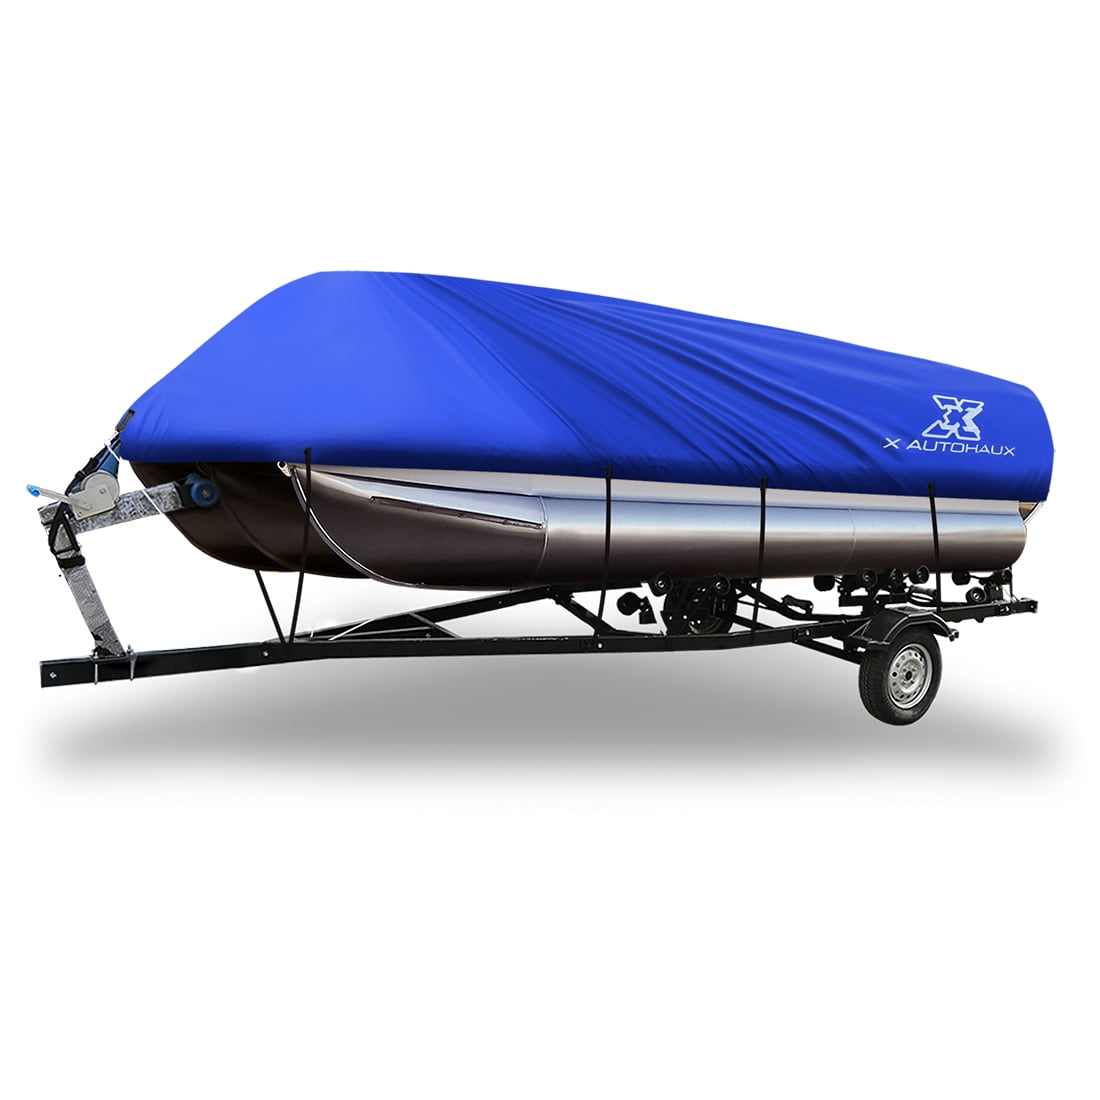 Blue 1720ft 300D Boat Cover Waterproof Trailerable for Square Shape Boats Walmart Canada